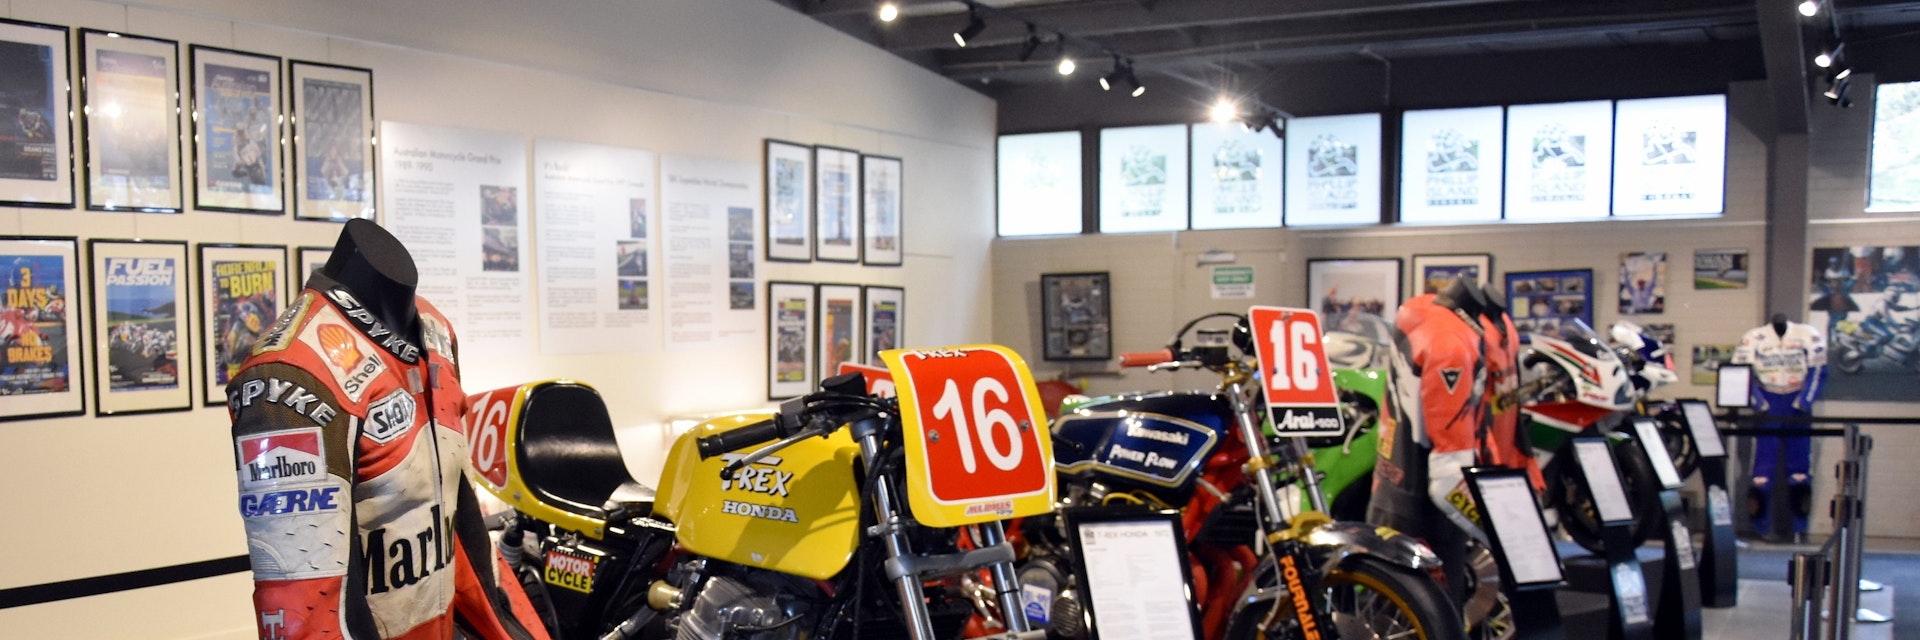 Phillip Island, Australia - December 28, 2016. History of  Motorsport display showcases the beginning of Motor sport on Phillip Island from the first car grand prix through to present days.